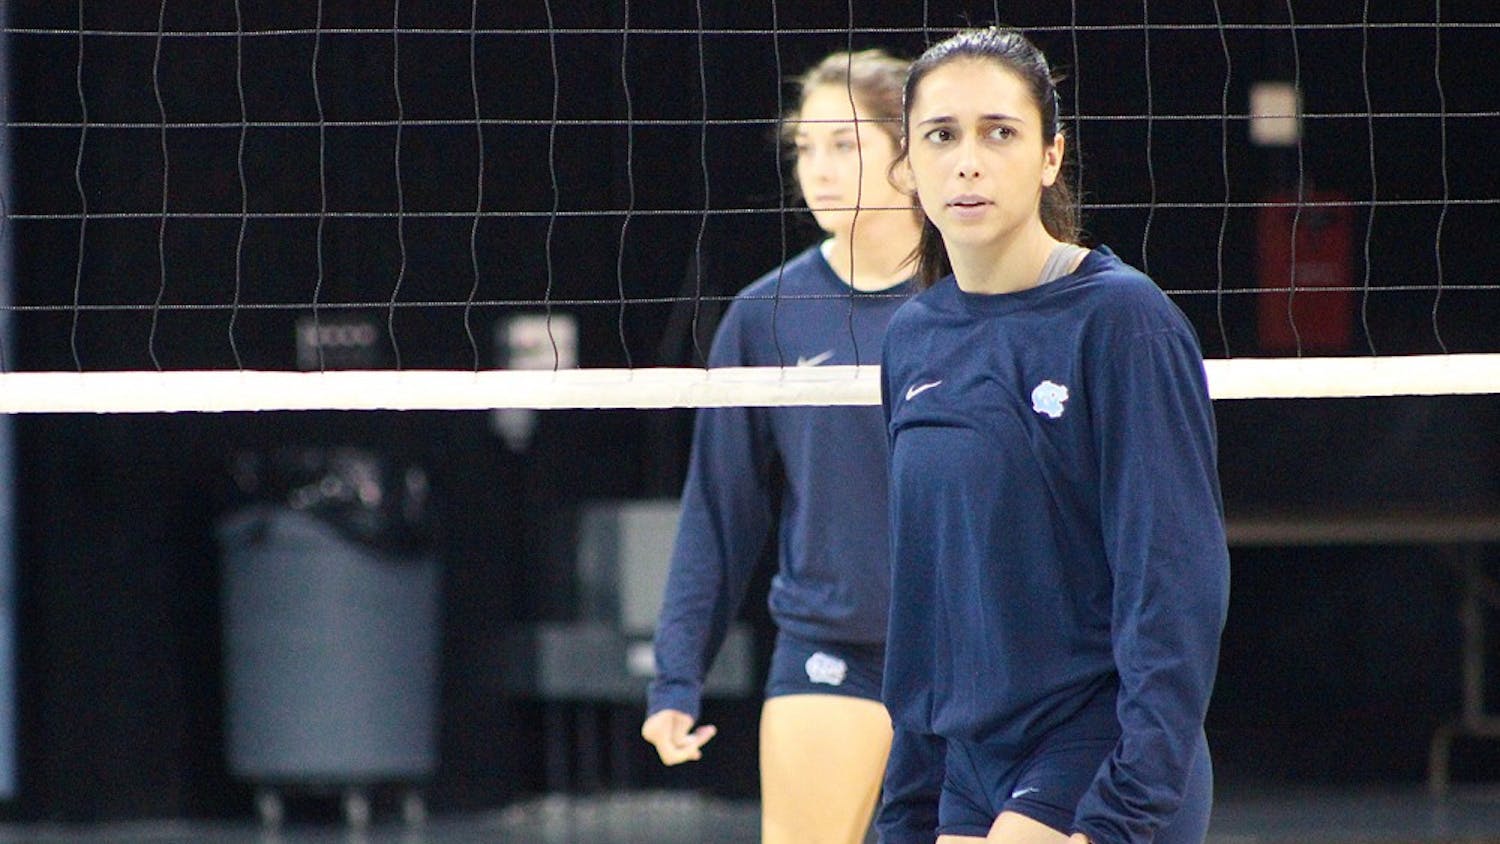 Ece Taner, a senior varsity  member of the Carolina Volleyball team, pictured on Tuesday evening in Carmichael Arena.